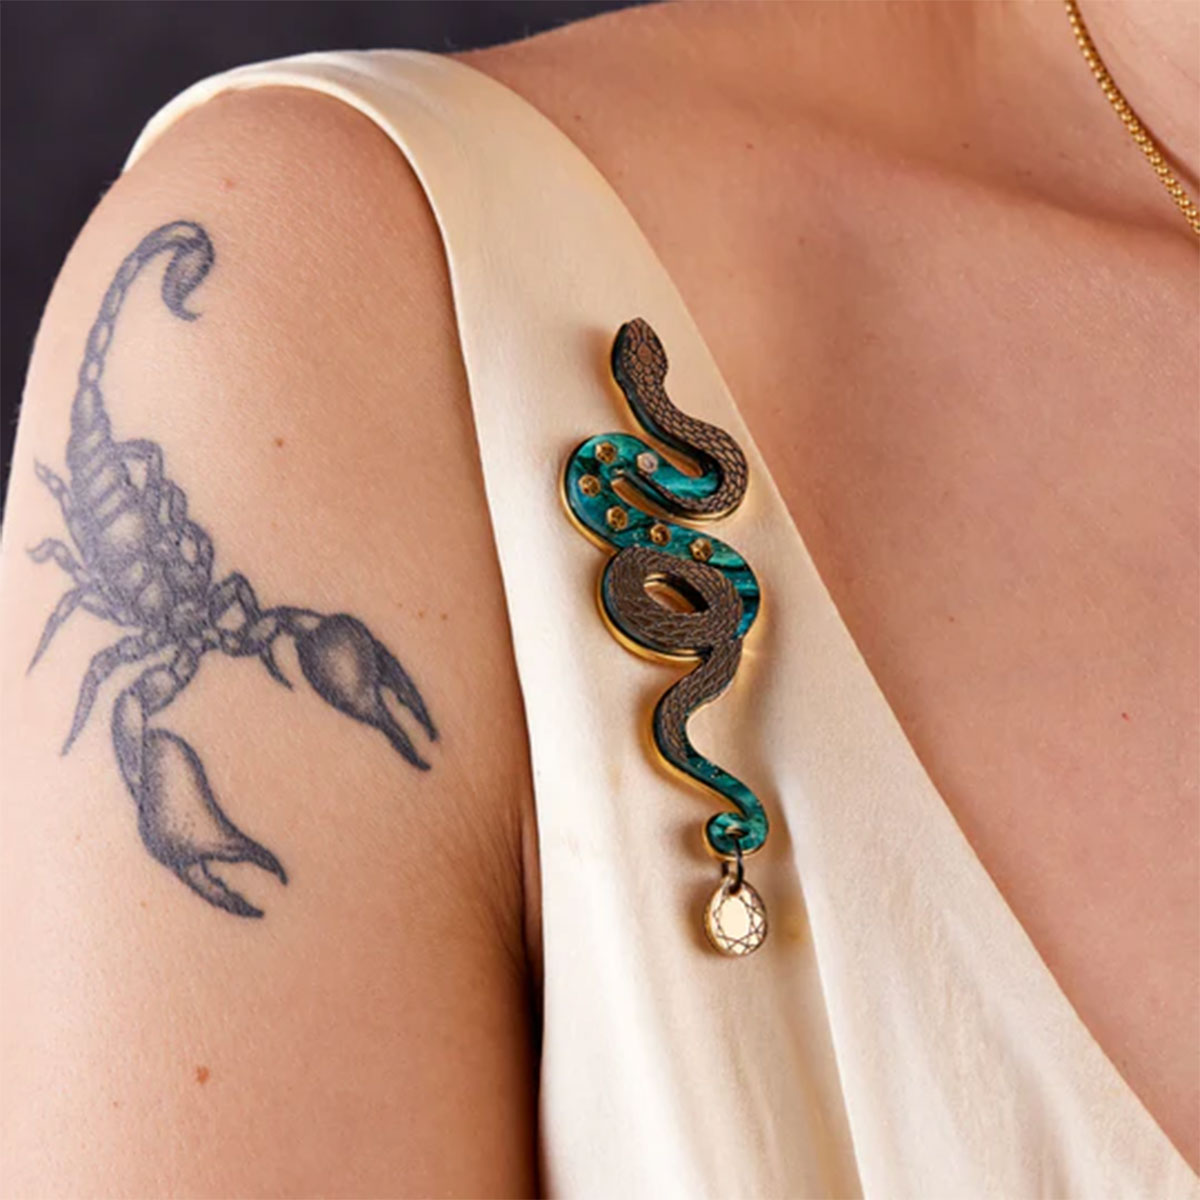 Buy Small Snake Tattoo Online In India - Etsy India